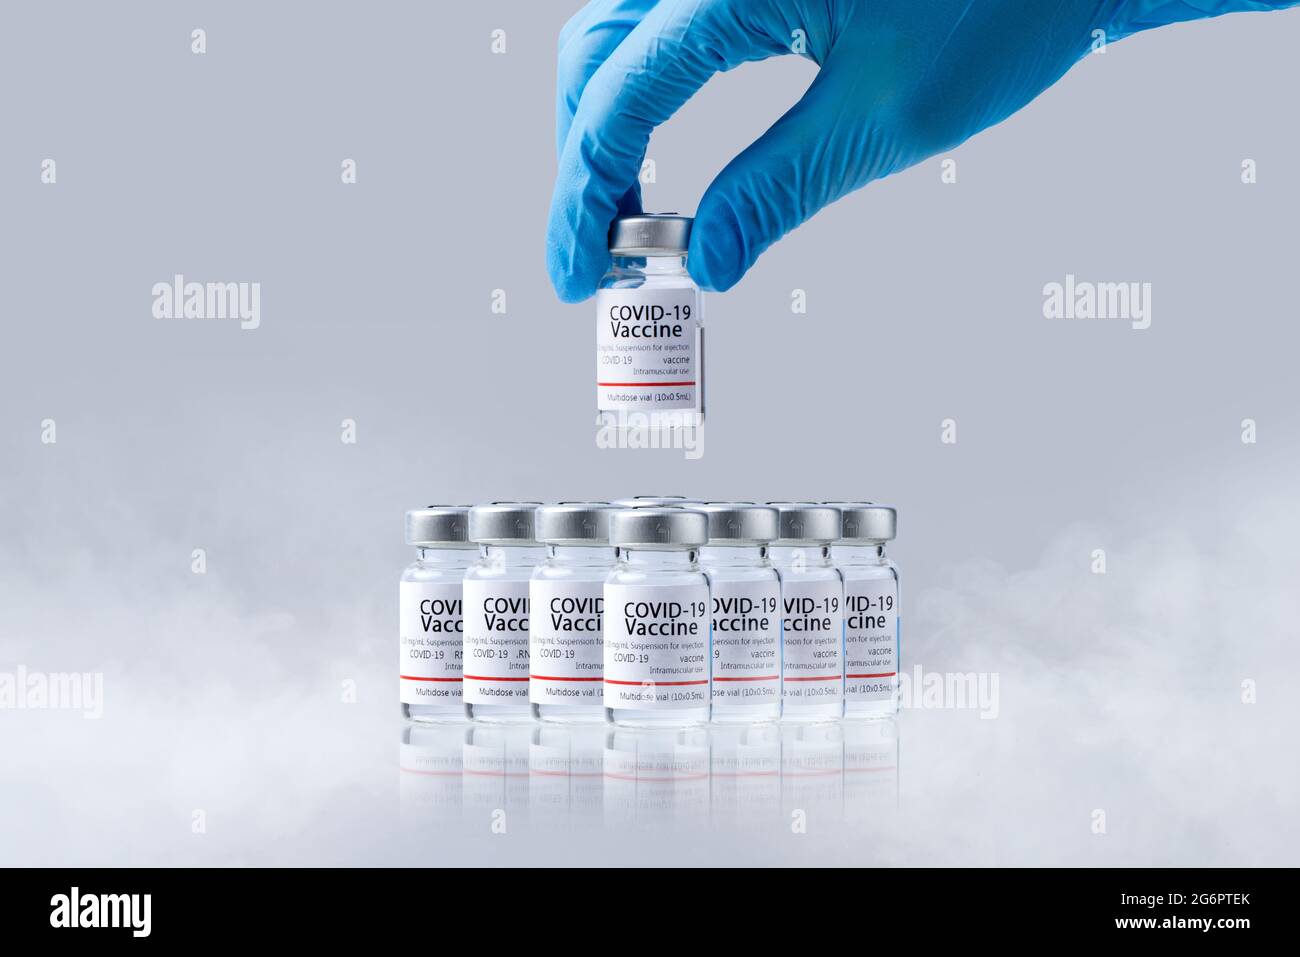 Hand holding frozen cold Vaccine vials for Covid-19 vaccine in laboratory. Group of Coronavirus vaccine bottles. Stock Photo